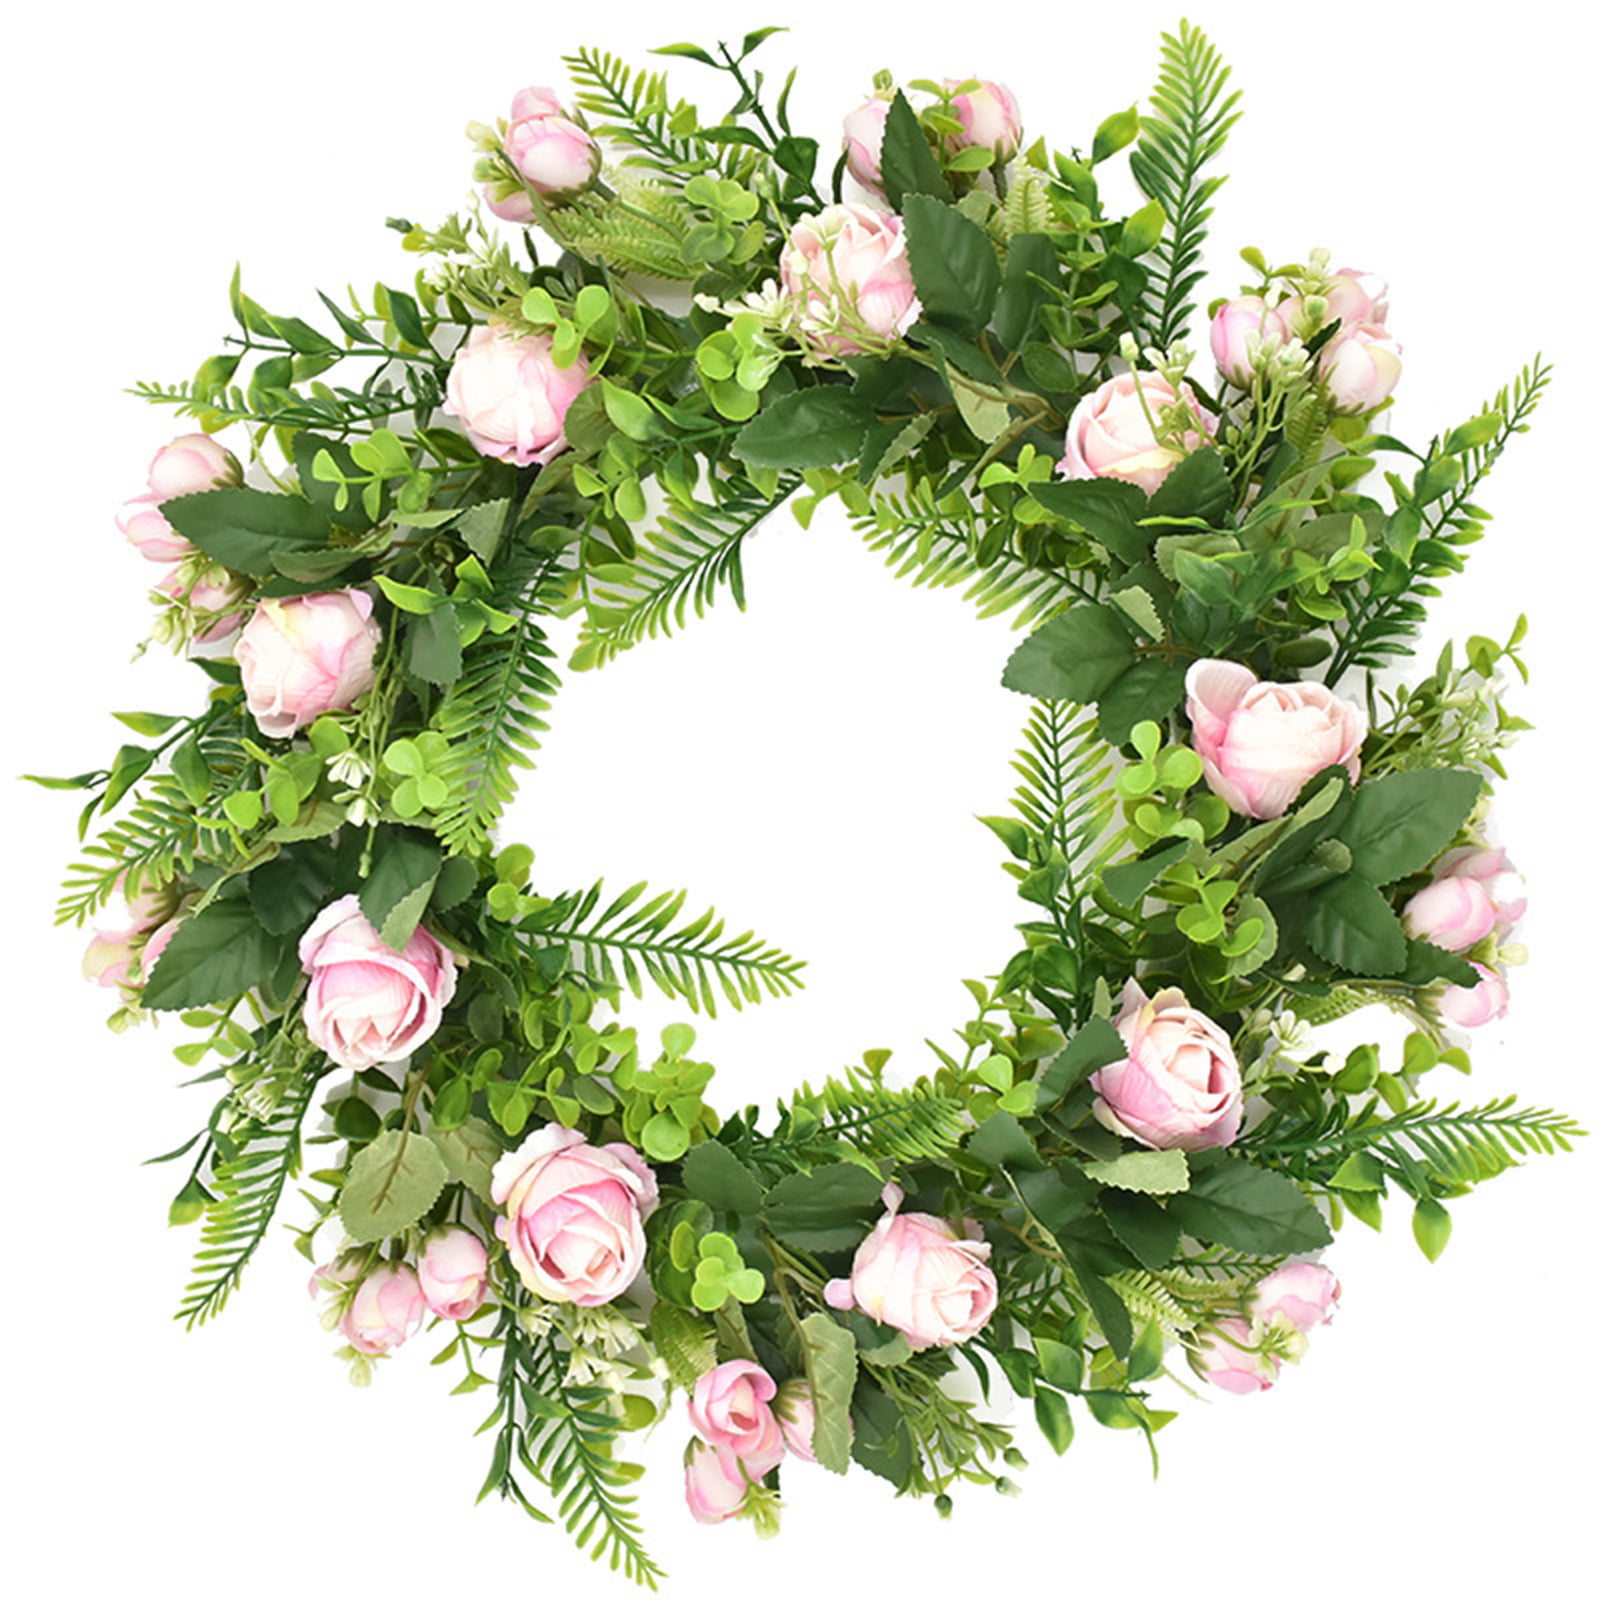 Details about   Artificial Lemon Wreath Wall Decoration Yellow Ring Flower Crafts Gifts Garland 